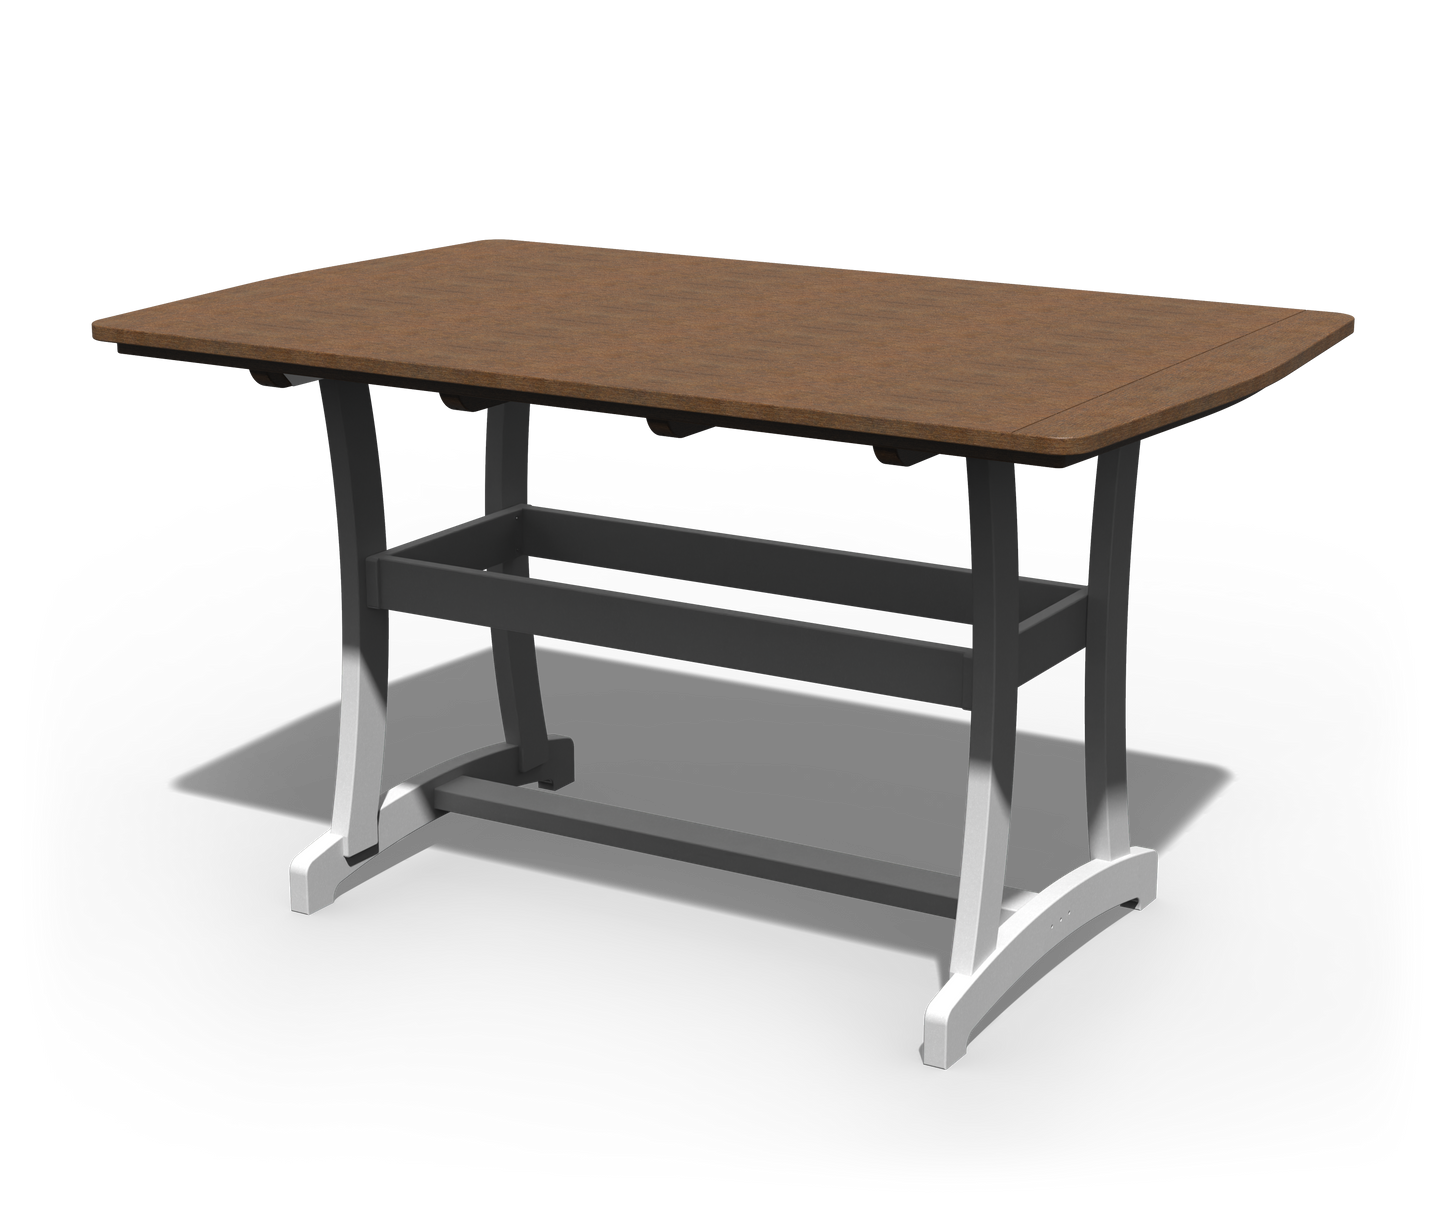 Patiova Recycled Plastic 4'x6' Legacy Bar Table - LEAD TIME TO SHIP 3 WEEKS